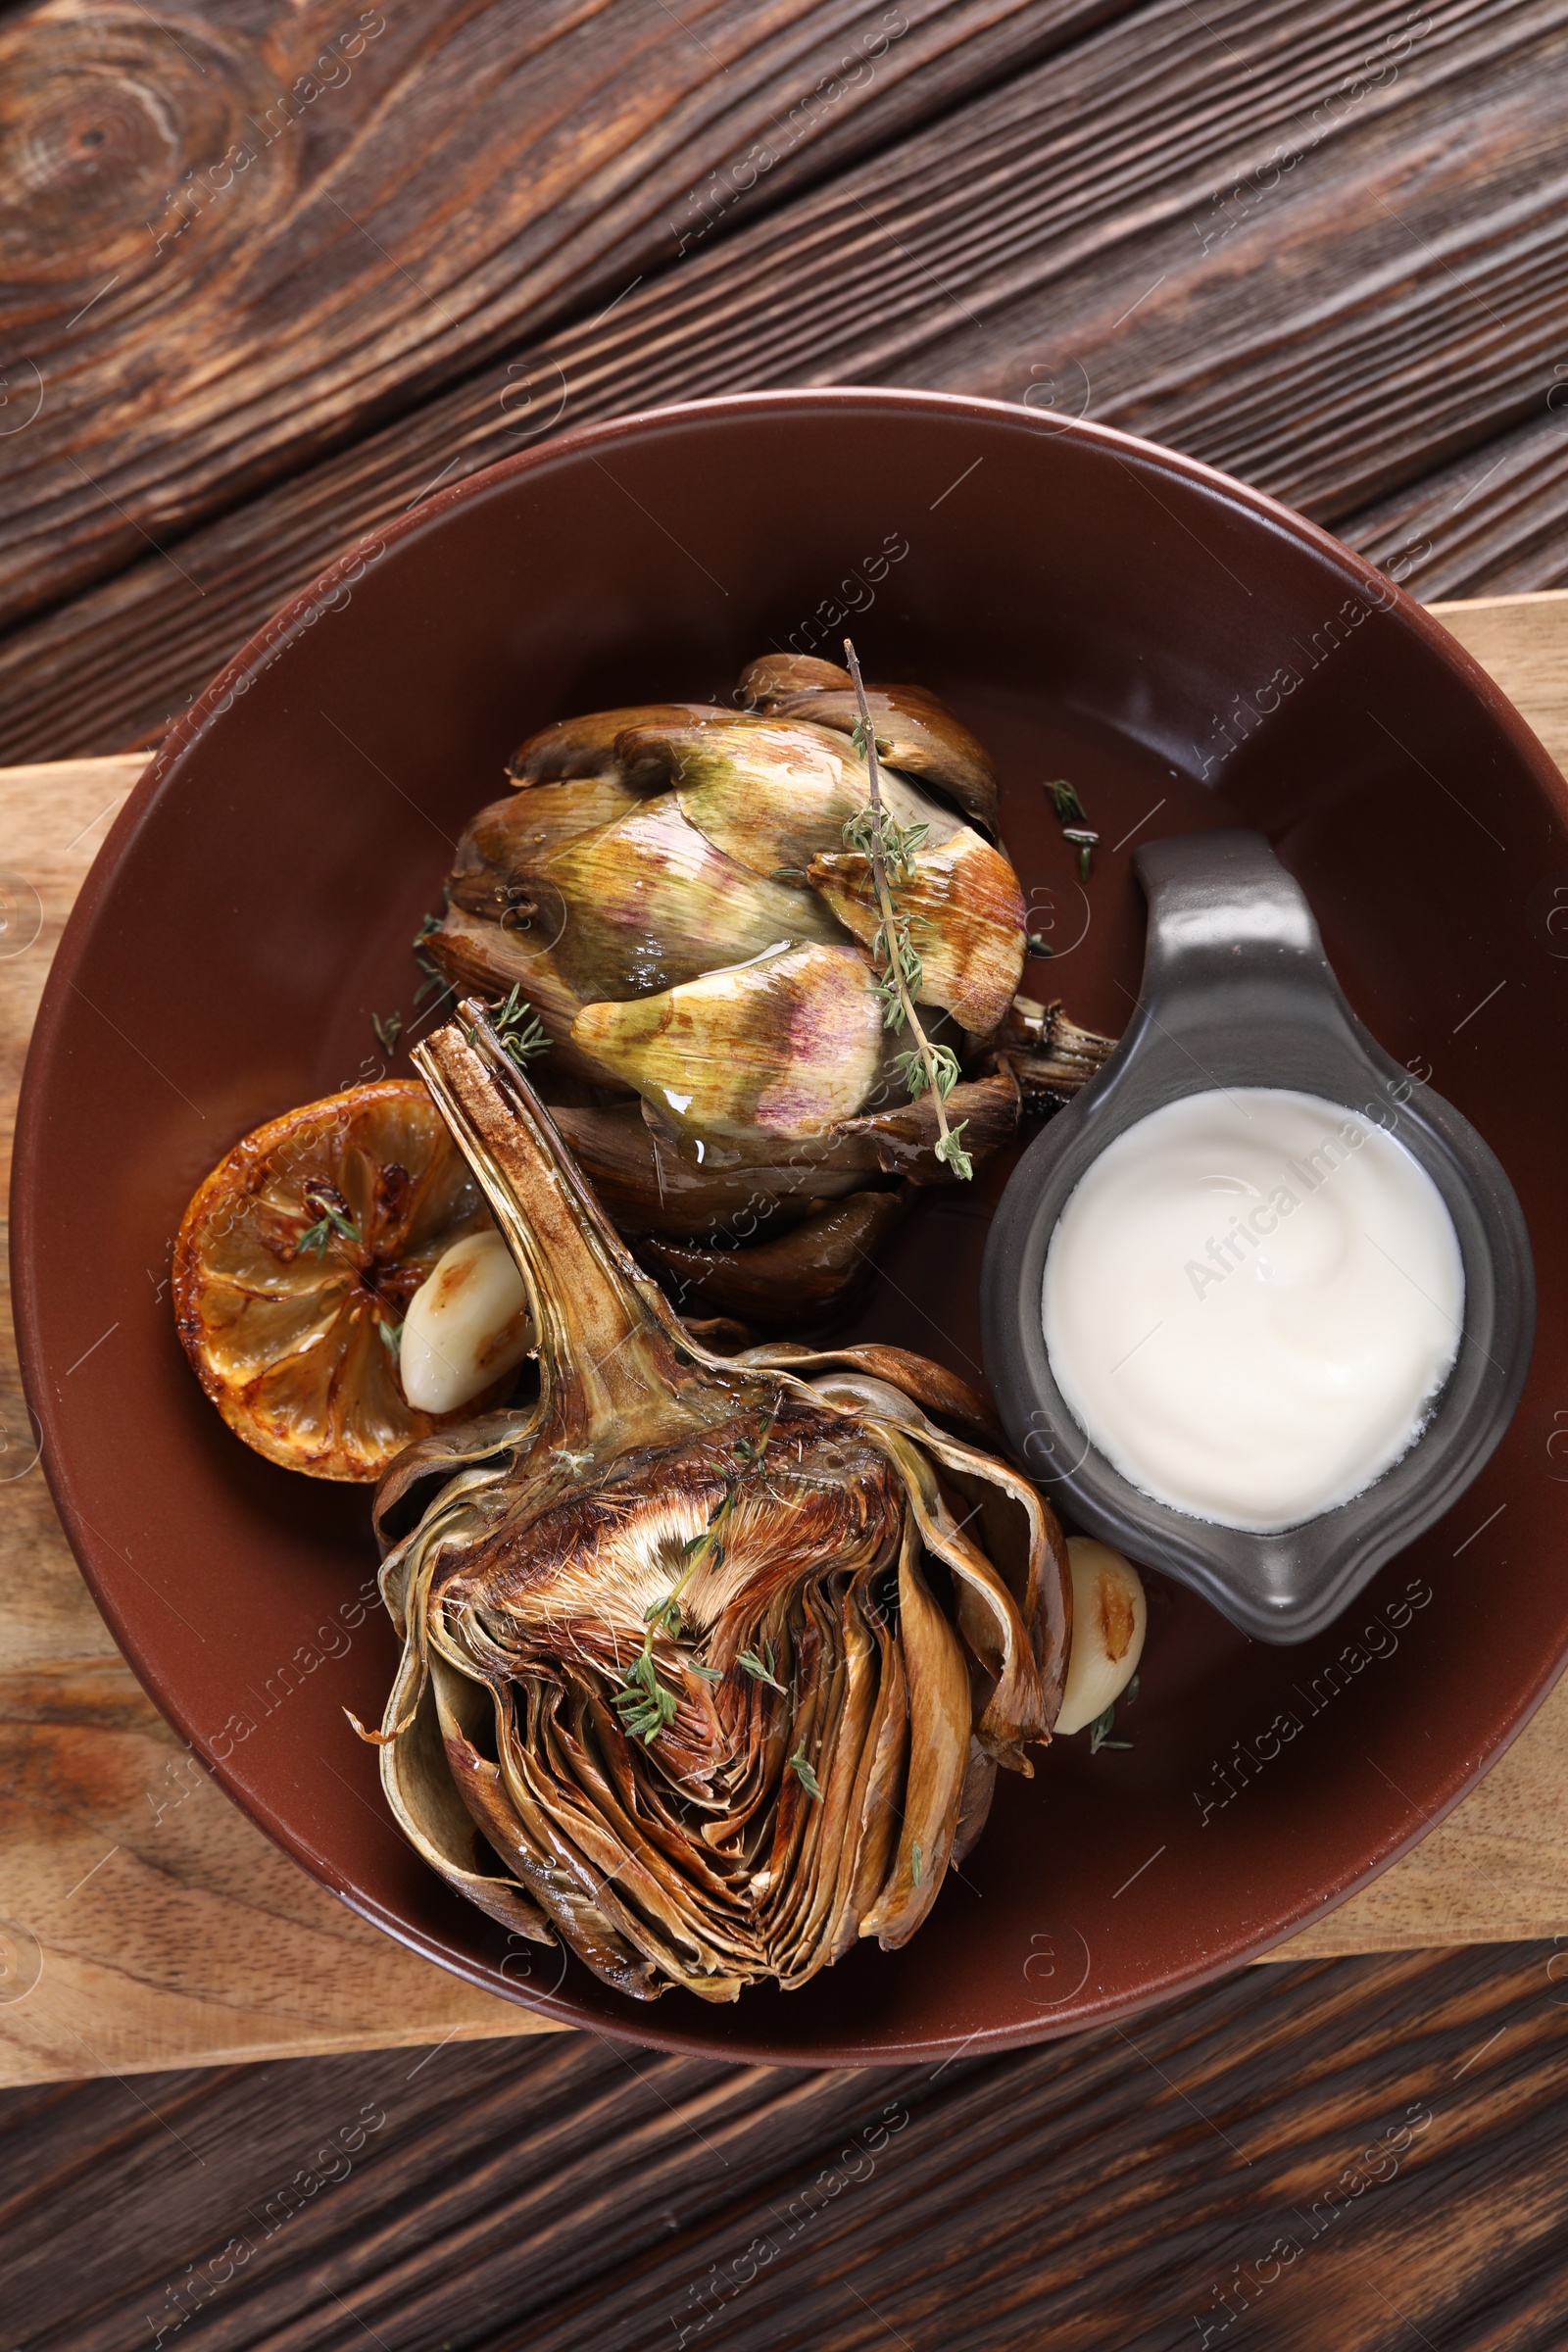 Photo of Tasty grilled artichoke and sauce in bowl on wooden table, top view